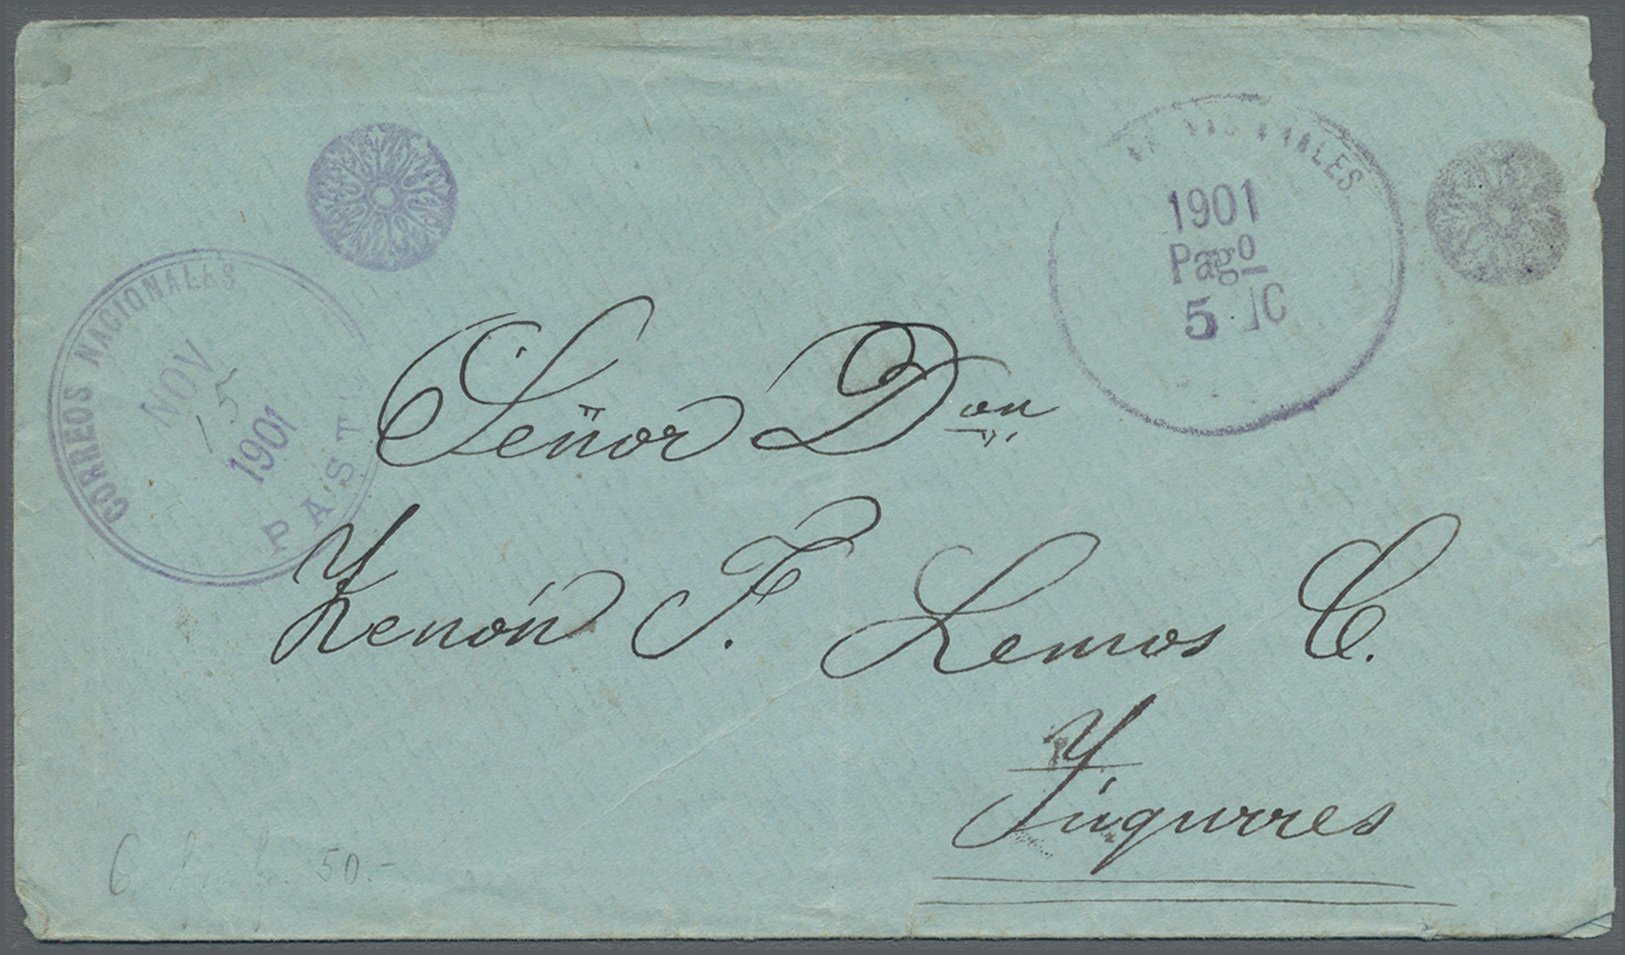 Br Kolumbien - Stempel: PASTO NOV 15 1901 And Rare "1901 Pago 5 C" Two Rare Violed Paid Duplex-cancels On Stampless Enve - Colombia